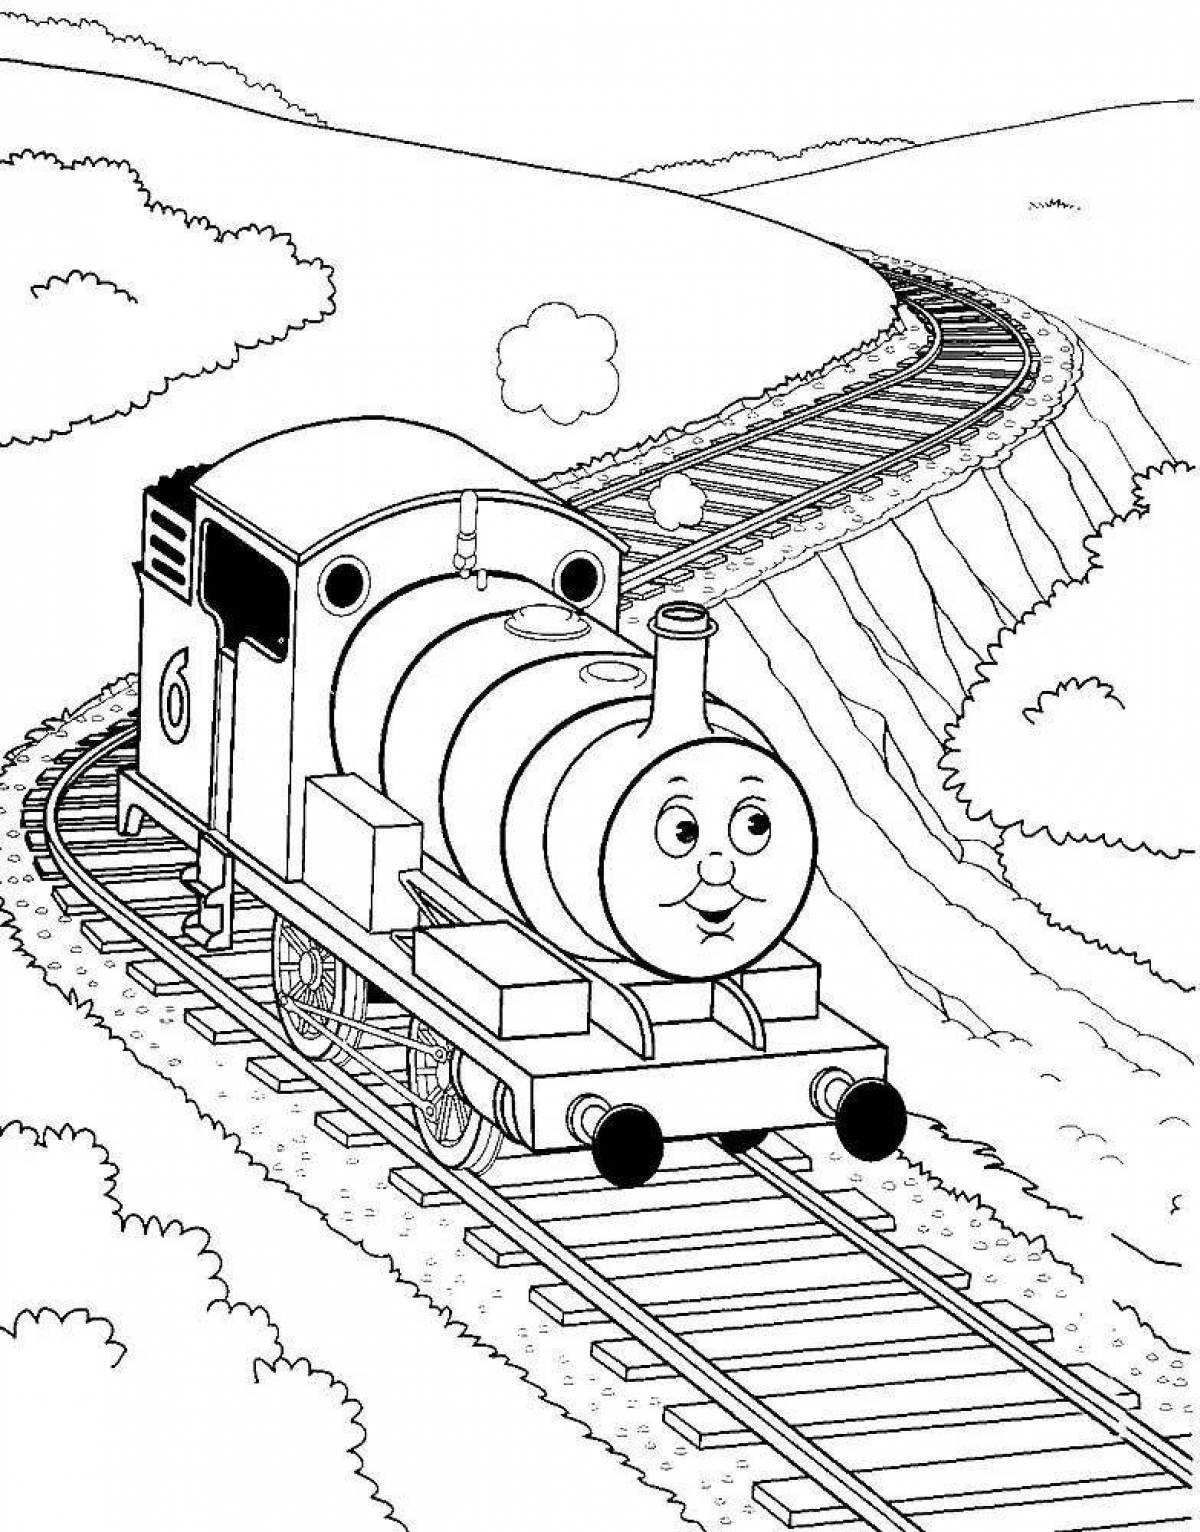 Adorable Thomas the Tank Engine Coloring Page for Kids